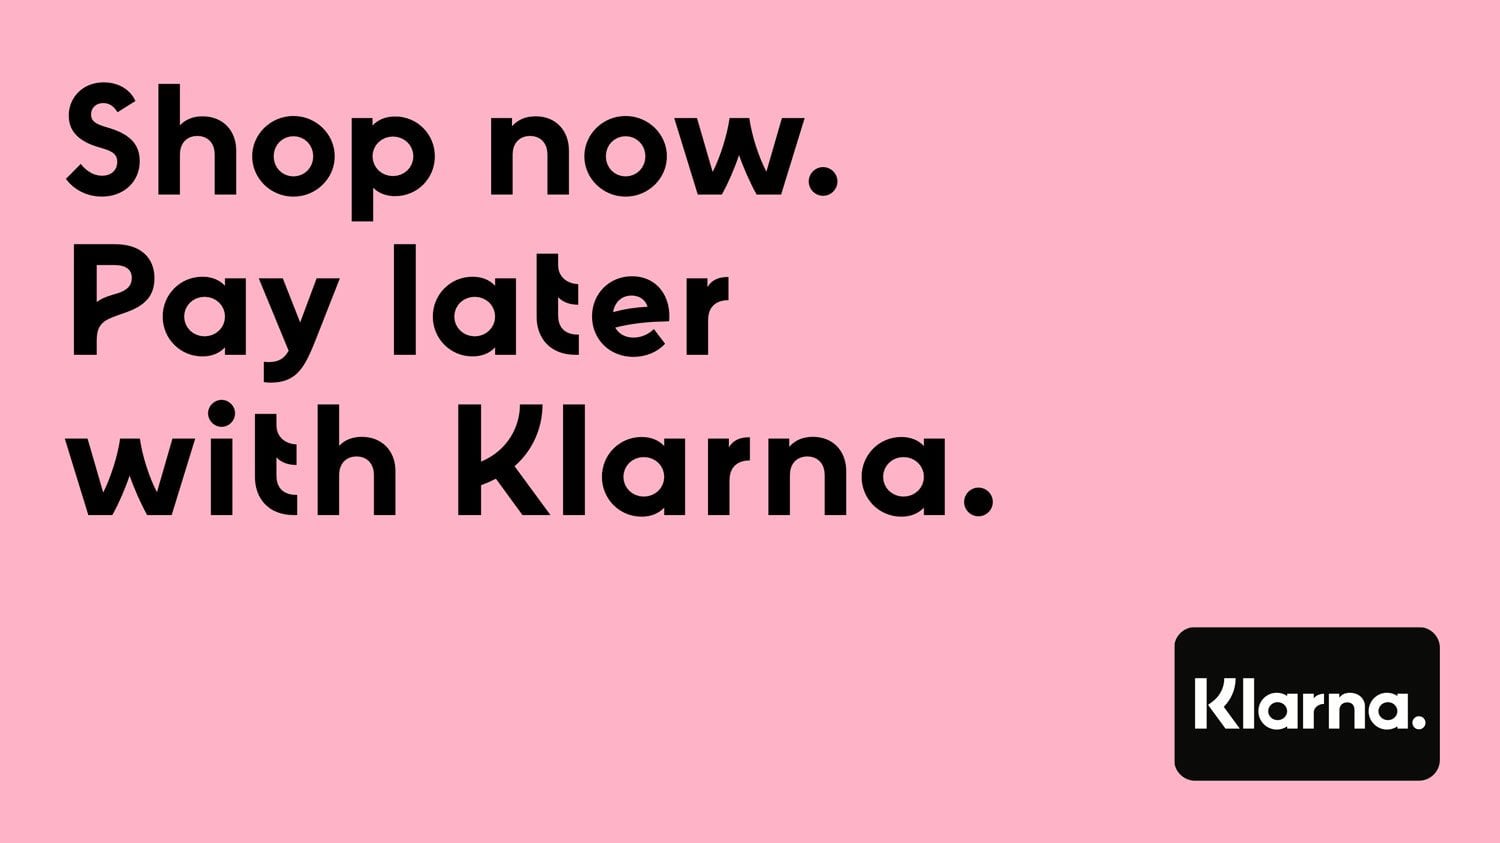 Learn how to pay by Klarna for your online shop purchases.